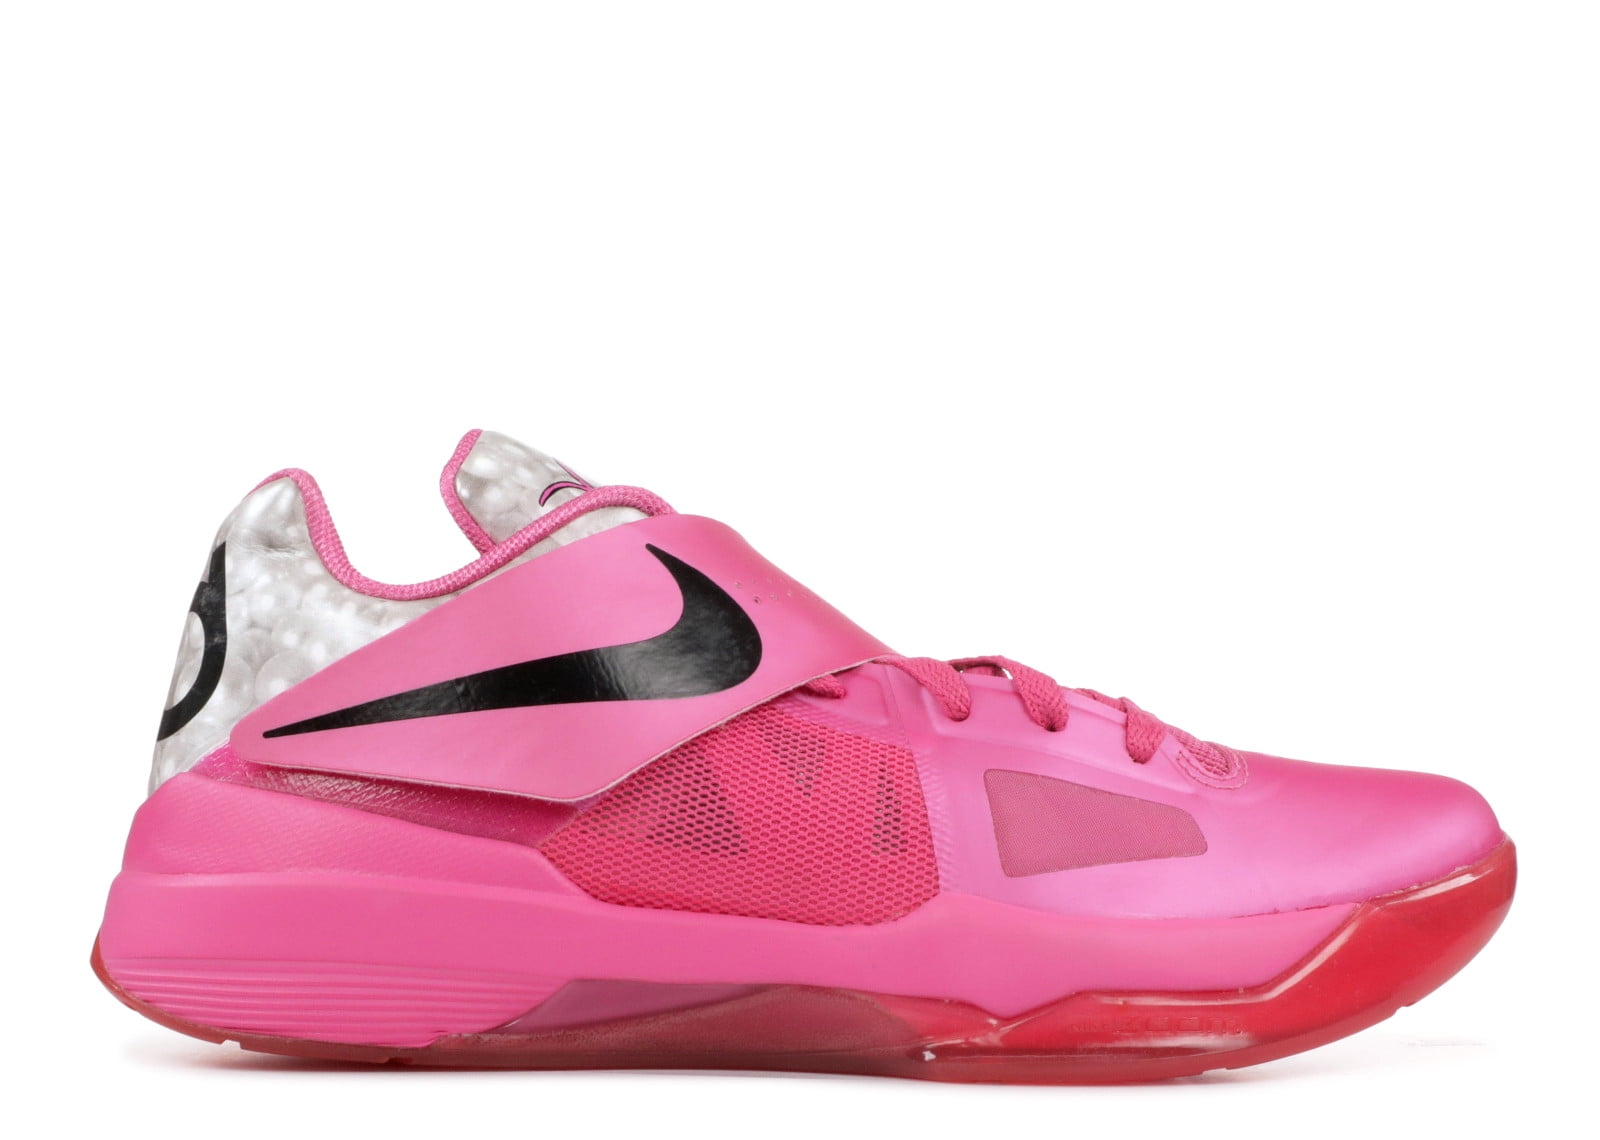 kd 2 Pink Kevin Durant shoes on sale